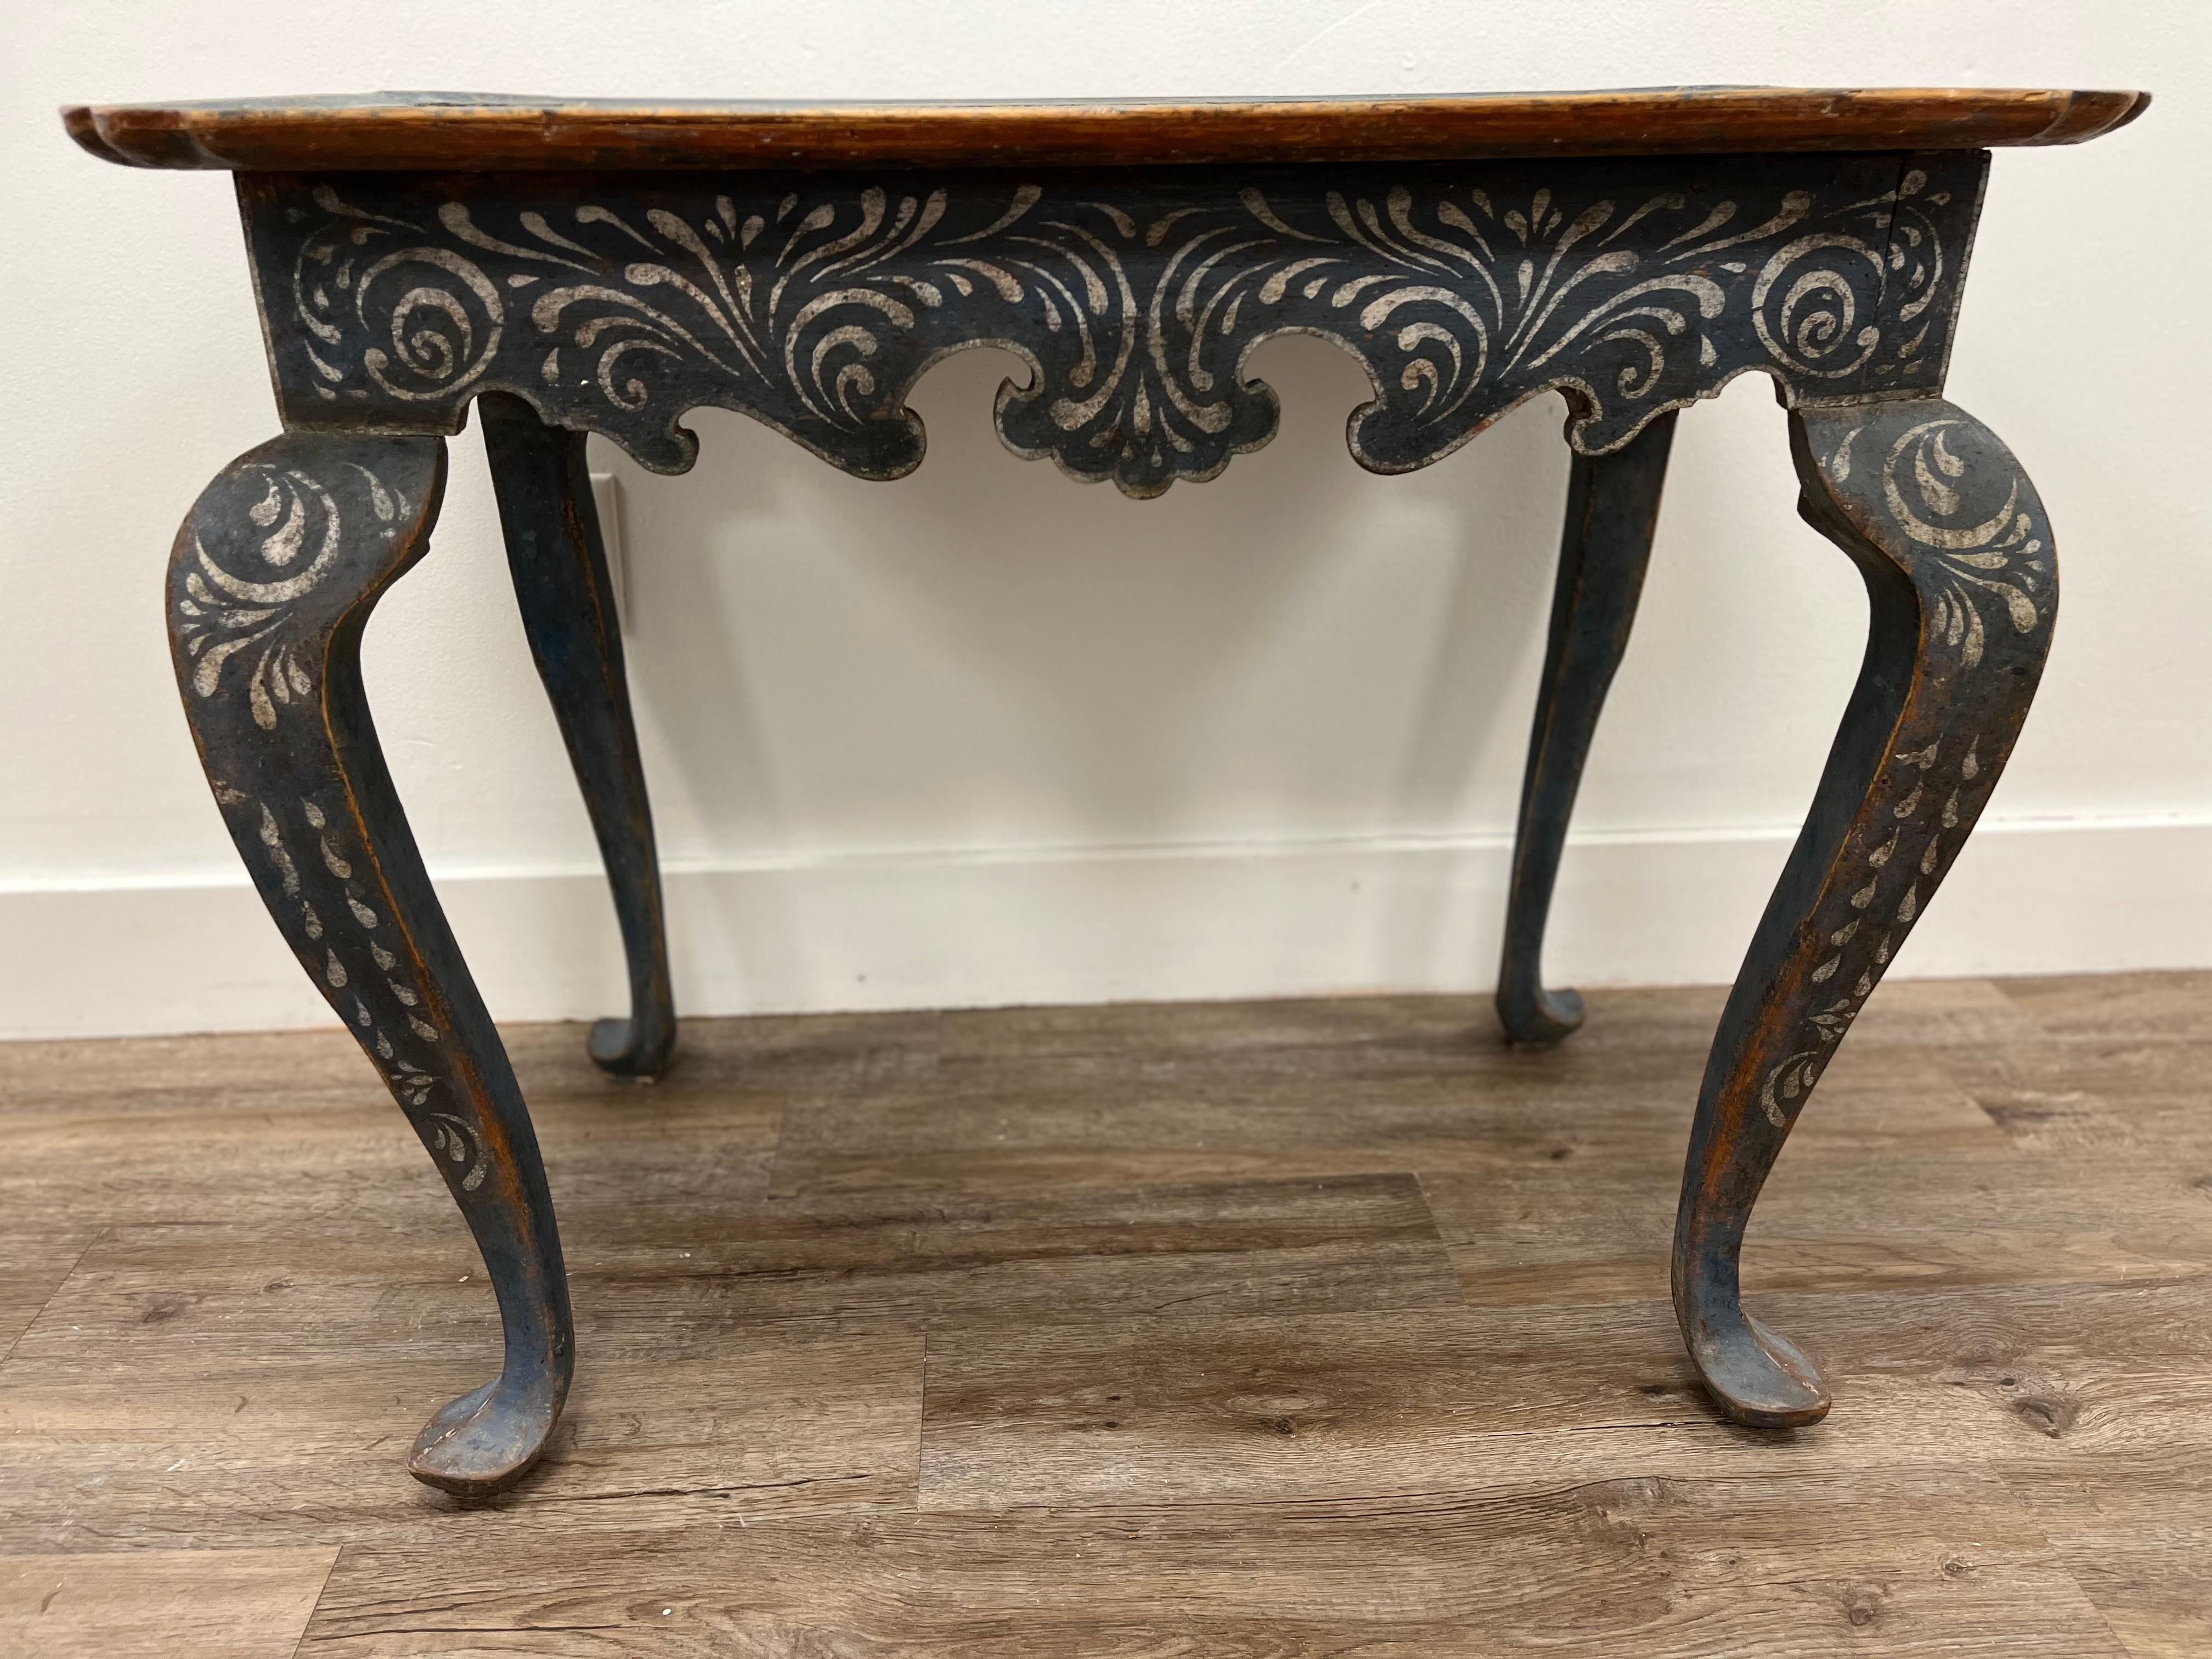 Hand-Carved 18th Century Swedish Rococo Table For Sale